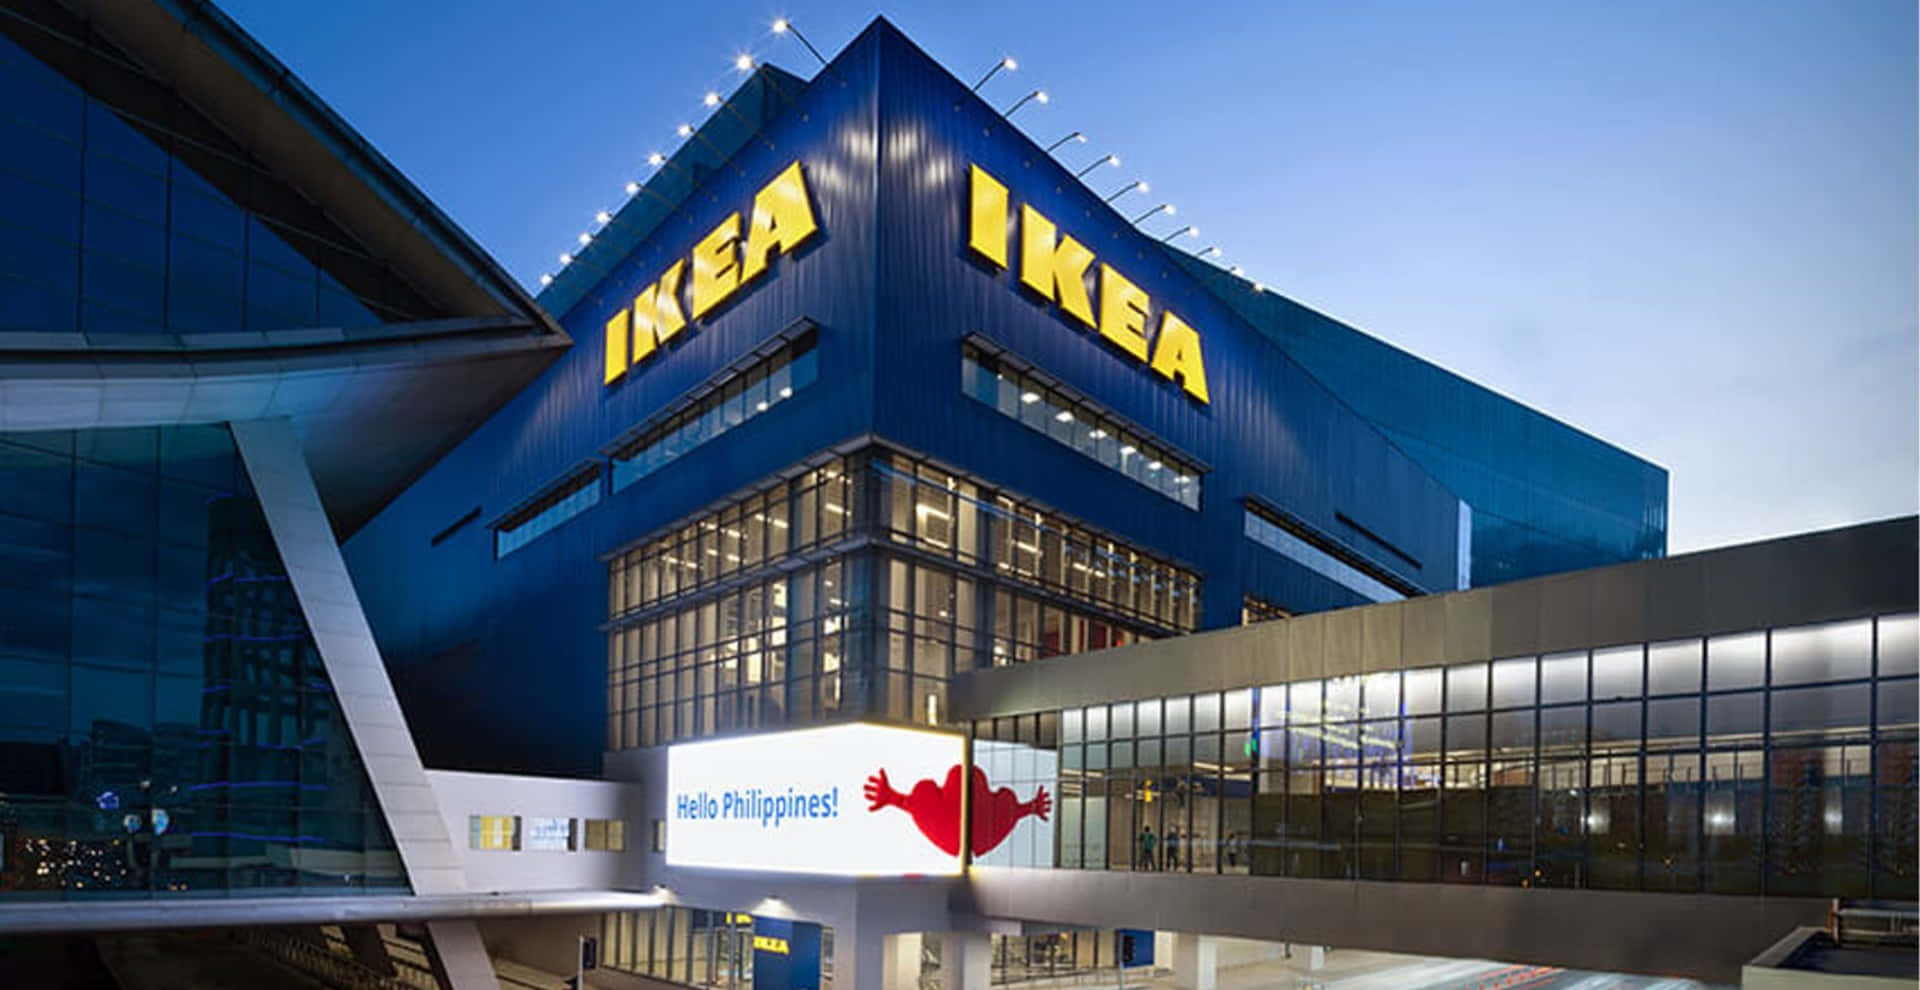 Ikea Canada's New Headquarters In Montreal